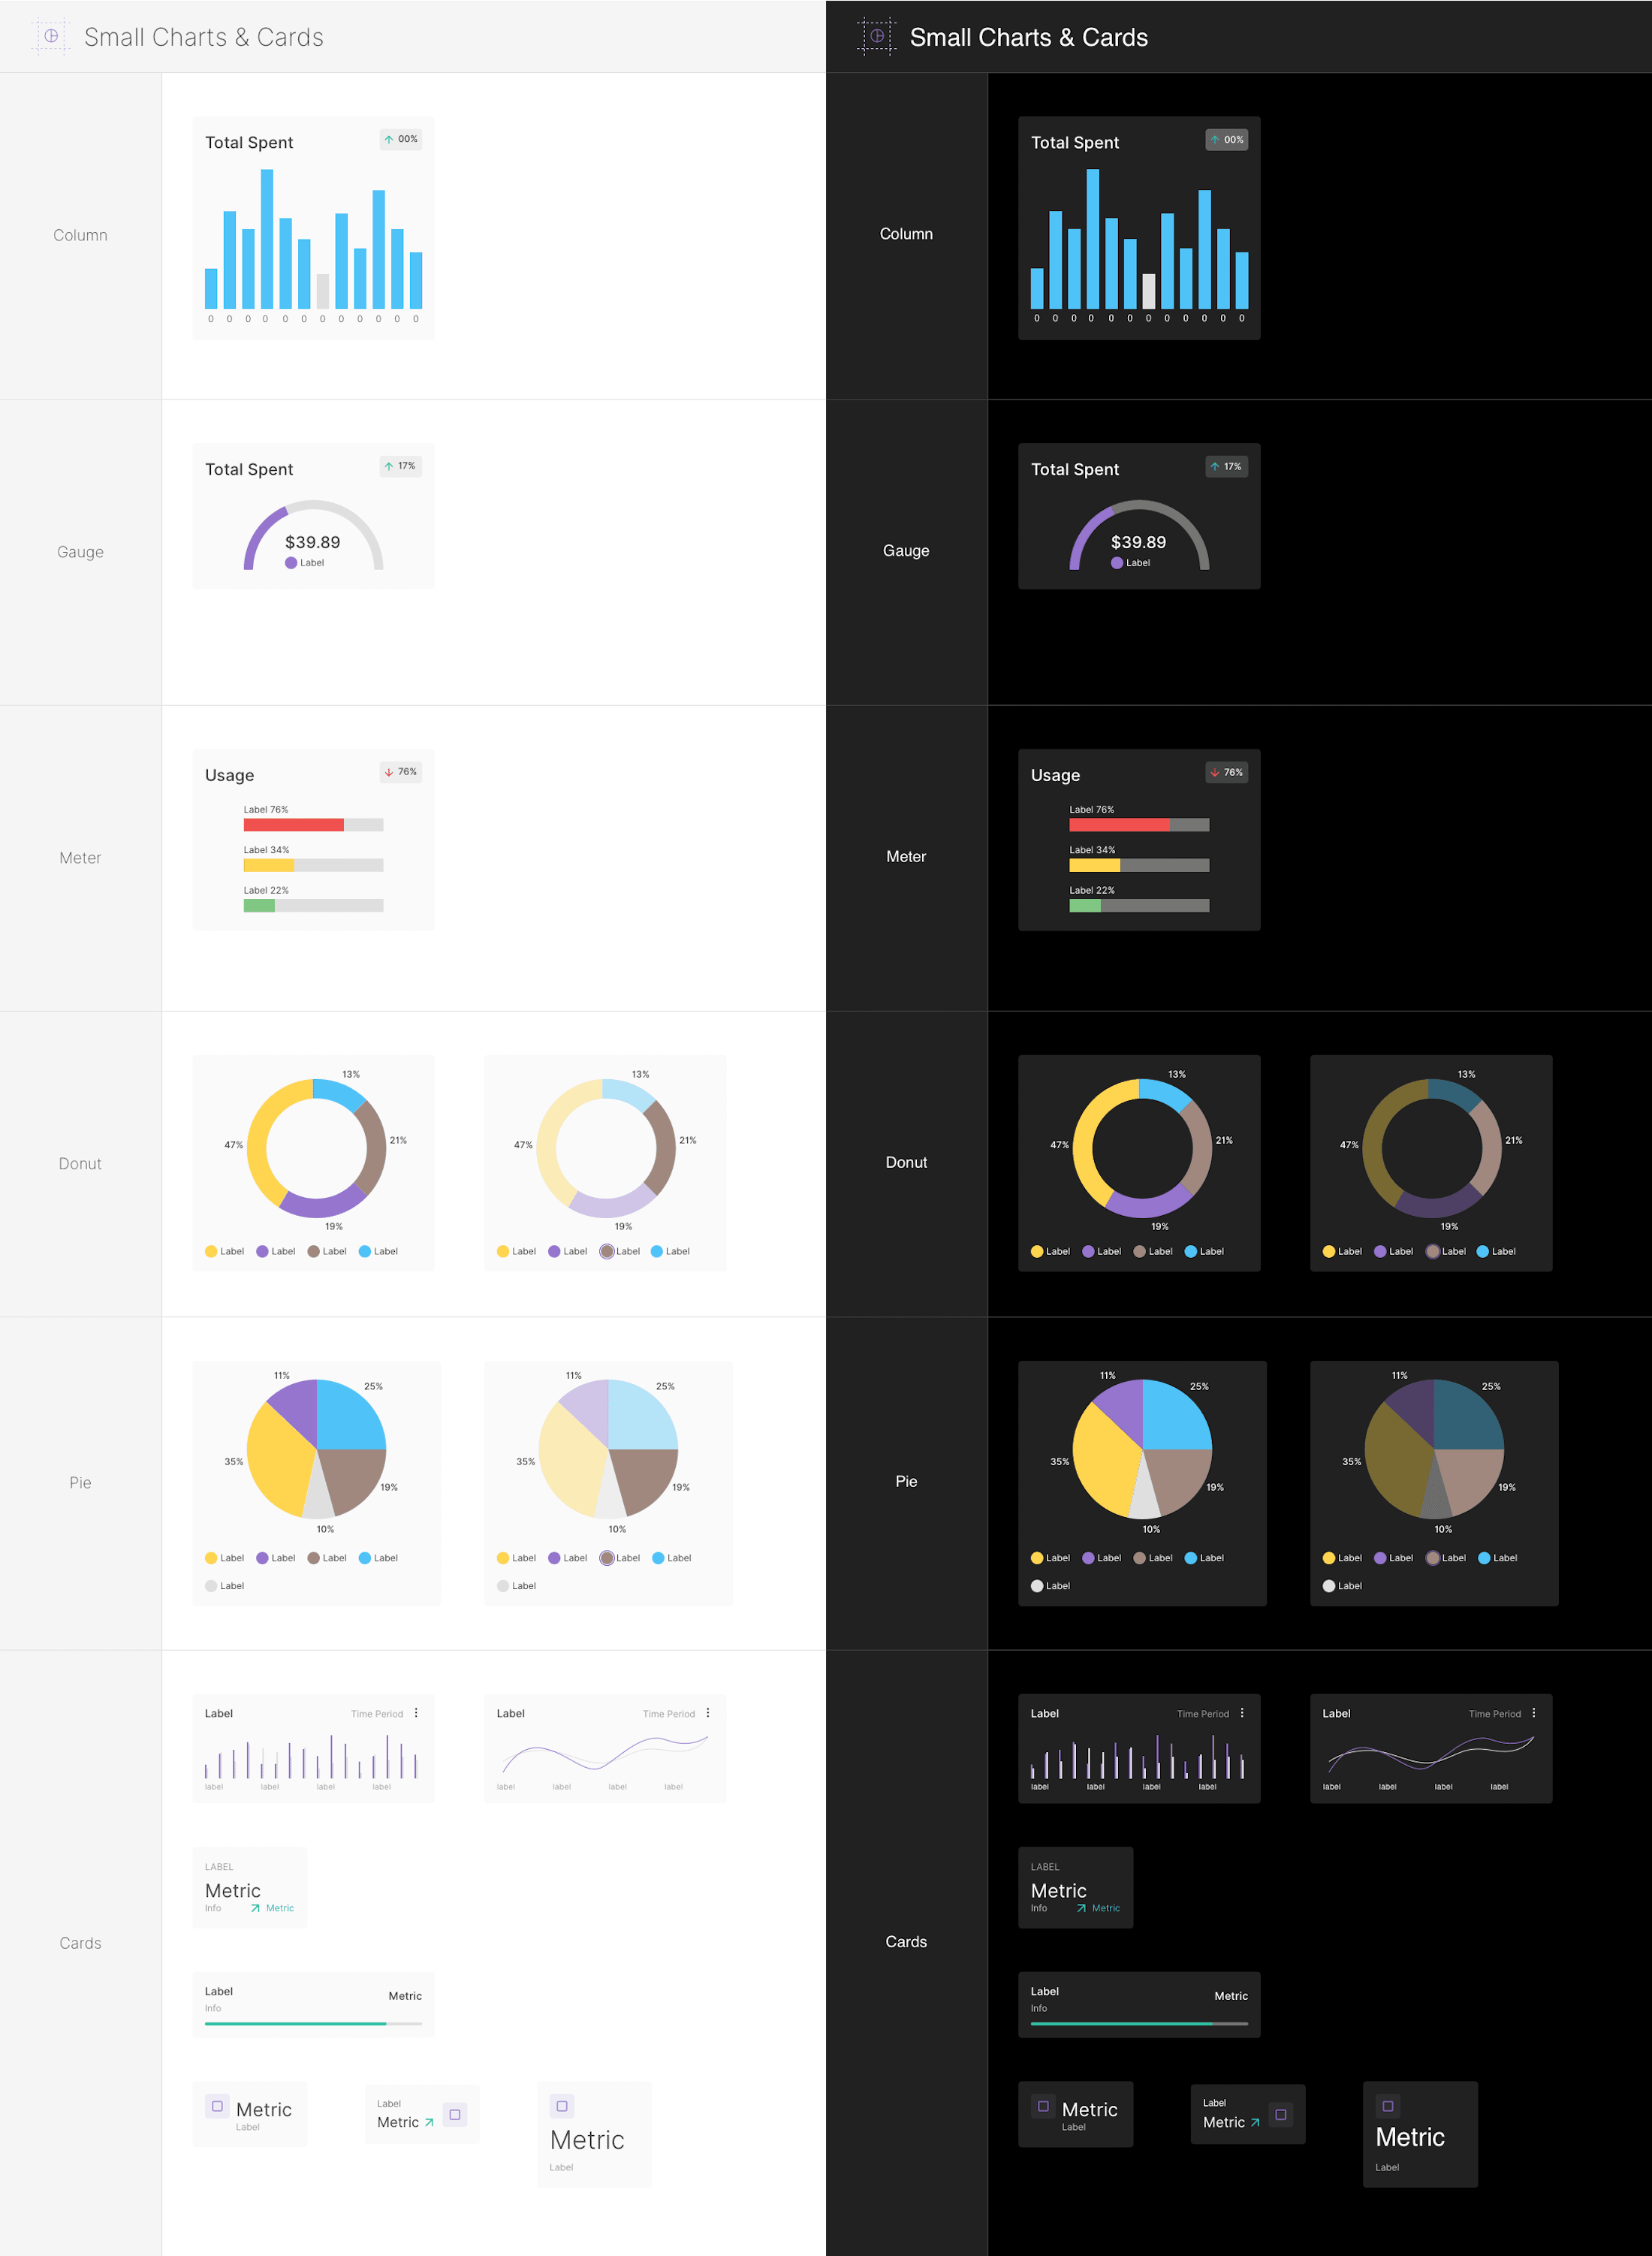 Components - 12 Mobile Small Charts